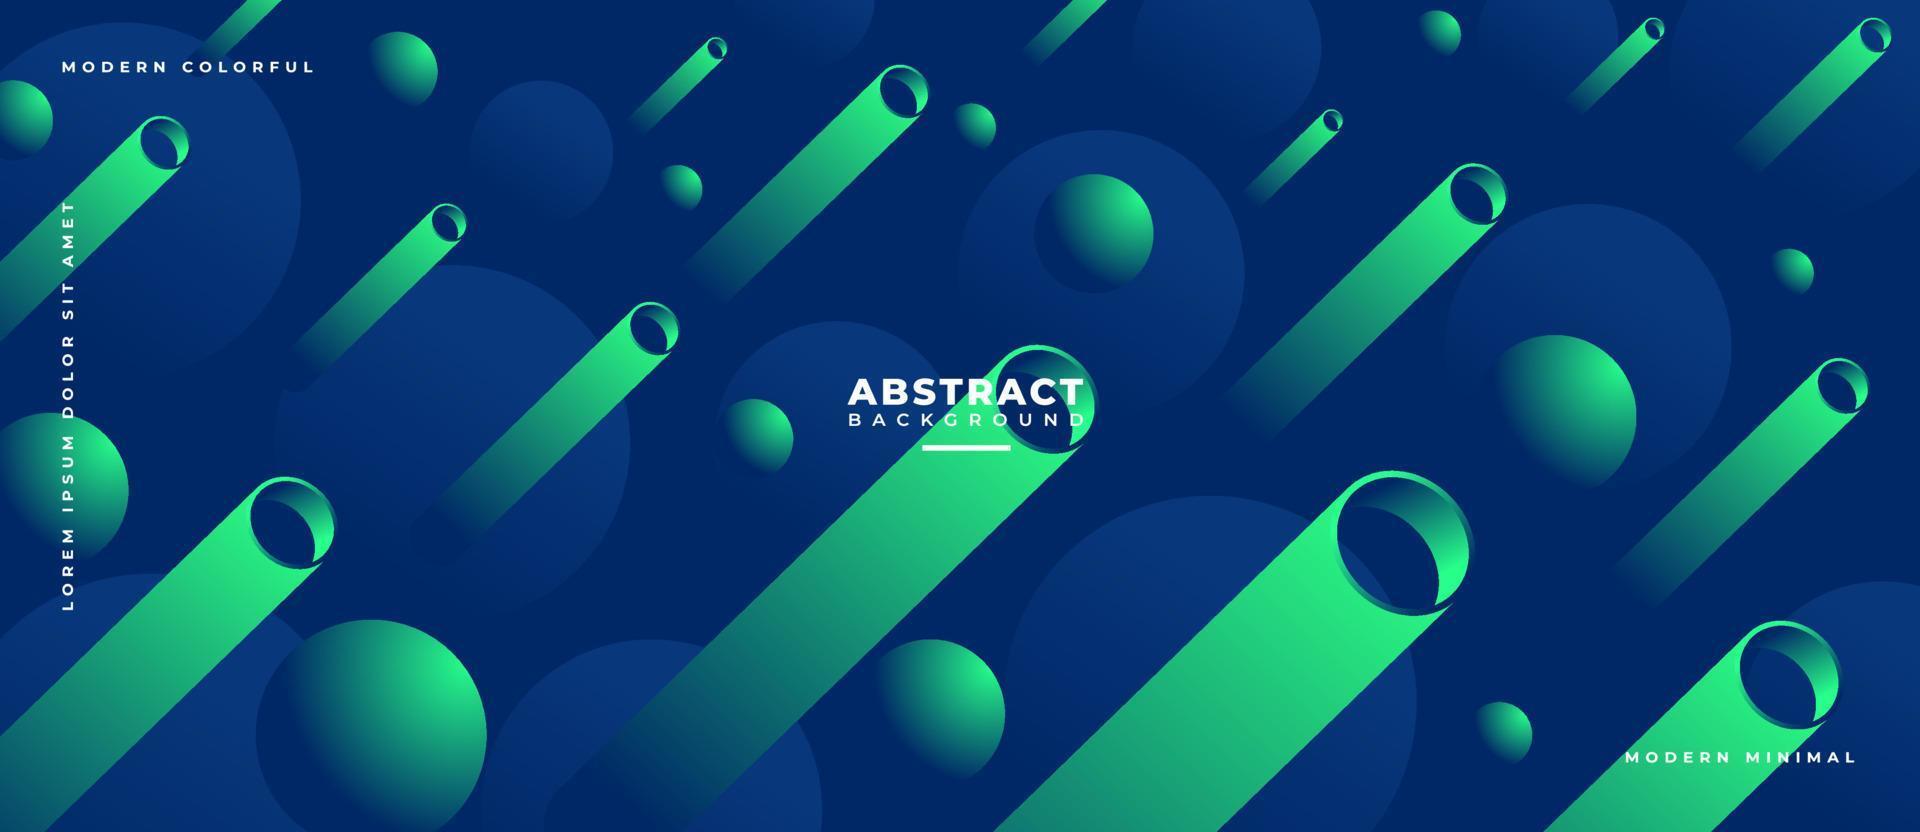 Geometric 3D futuristic gradient green circle tube animated on navy blue abstract background. vector